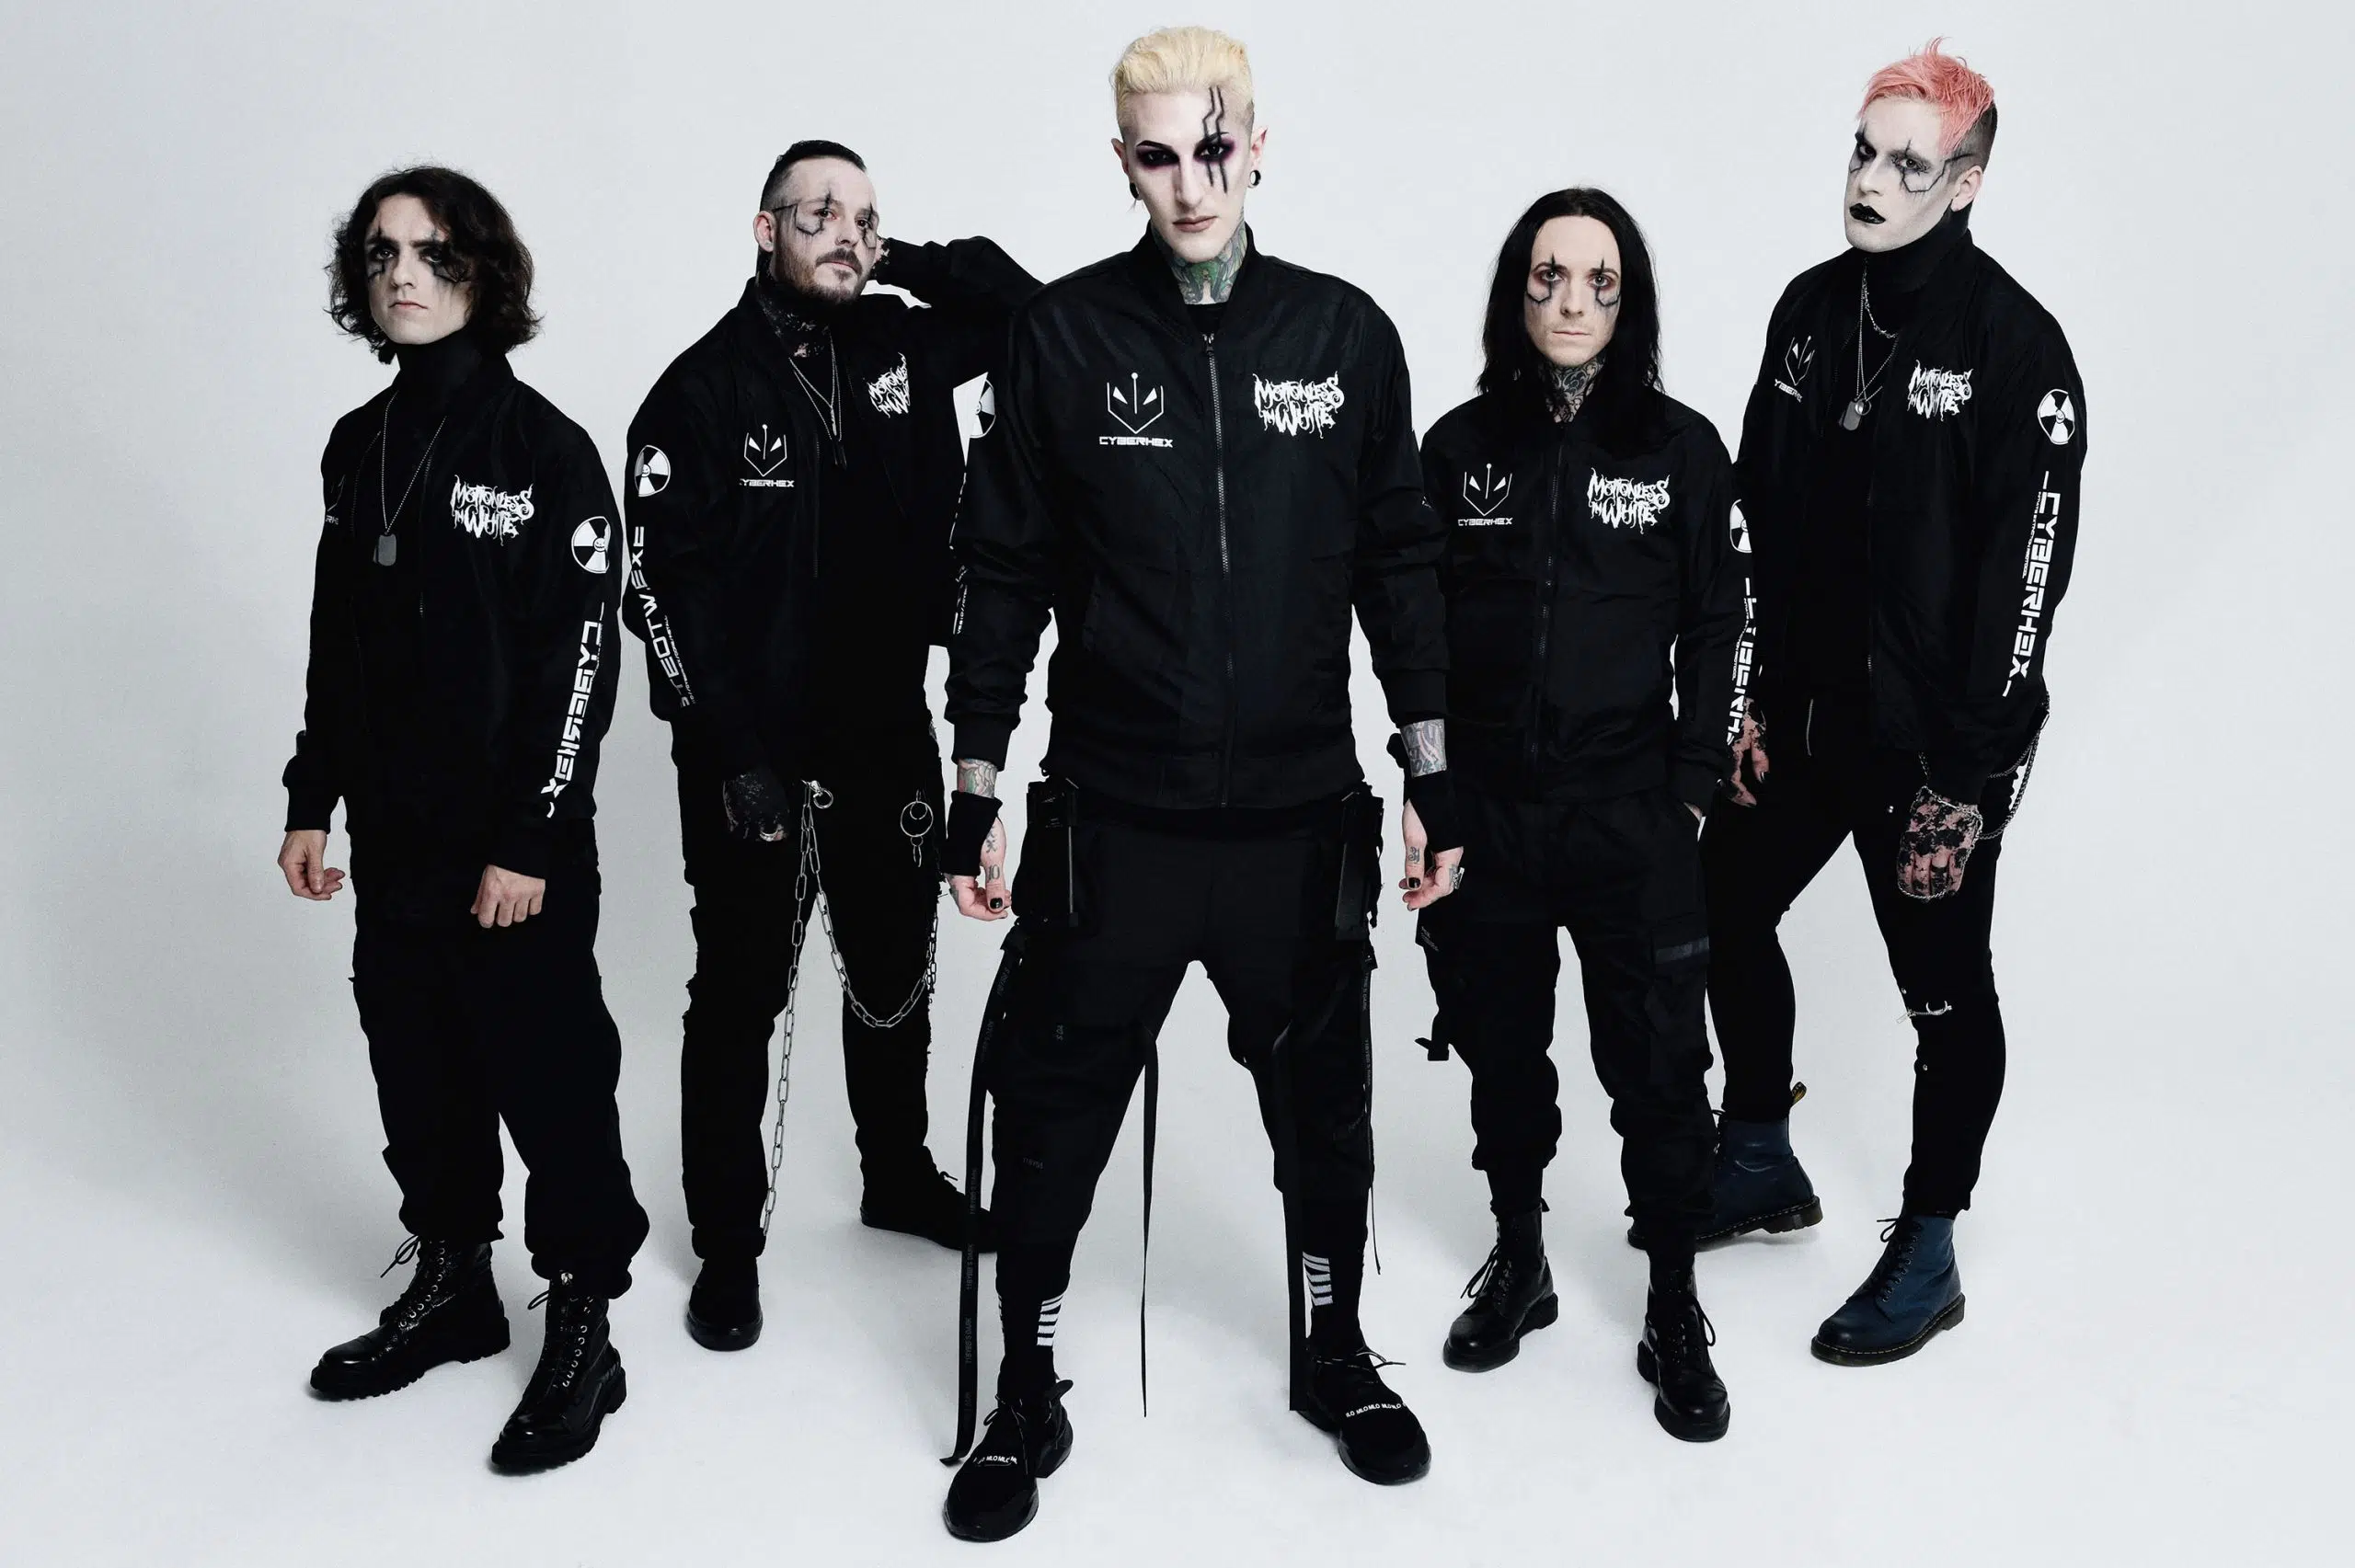 MOTIONLESS IN WHITE ANNOUNCE THE END OF THE WORLD!